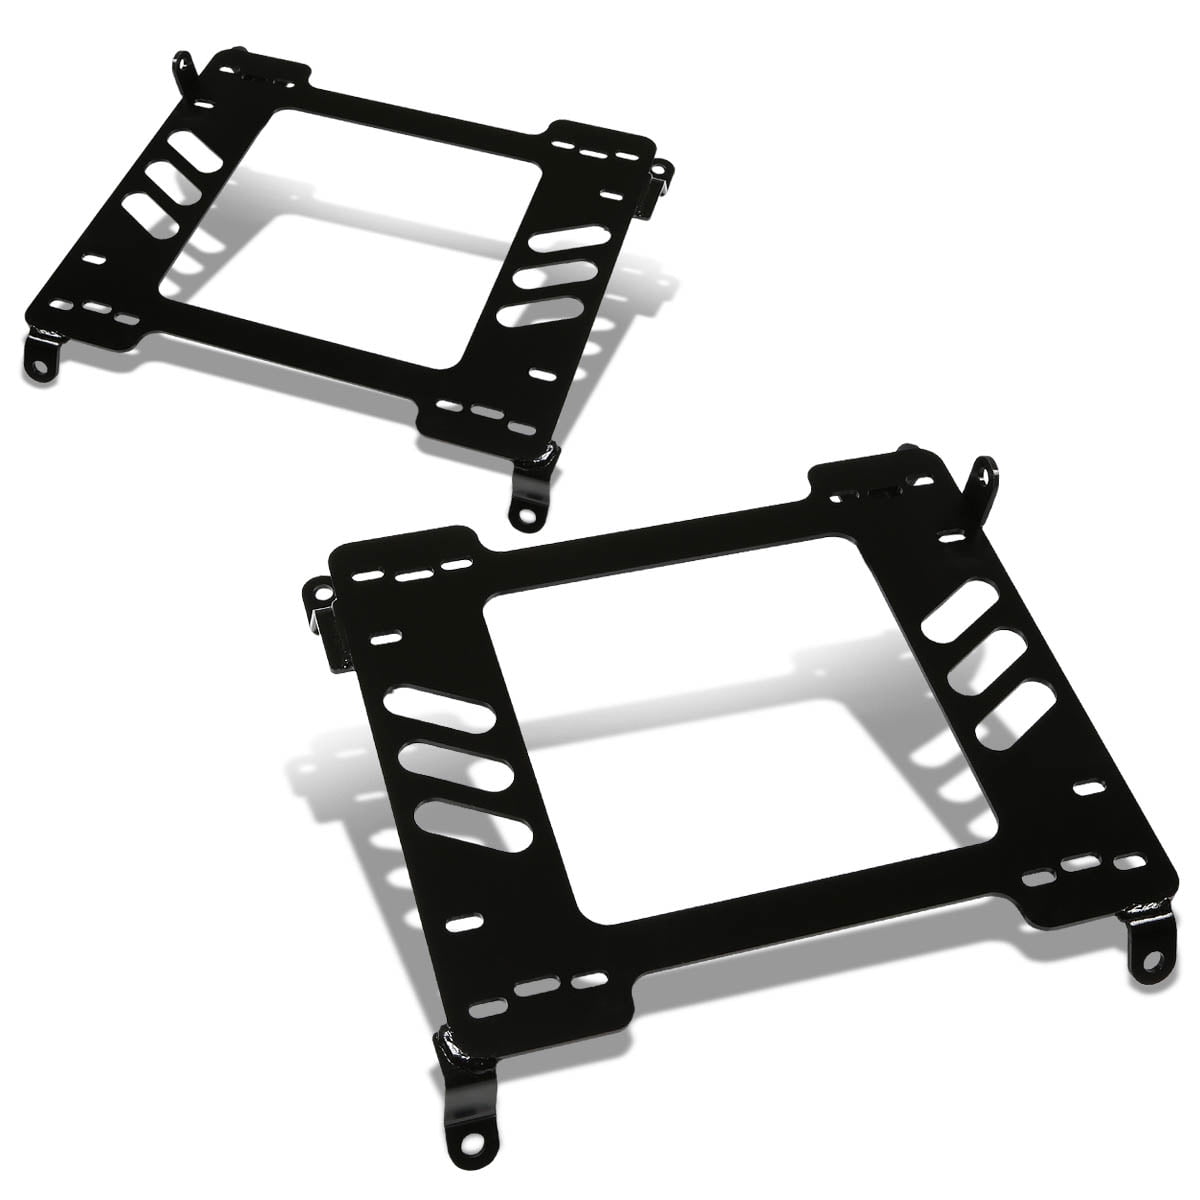 DNA MOTORING SBK-LM-240SX Pair of Low Mount Tensile Steel Seat Brackets Compatible with S13/S14 89-98 